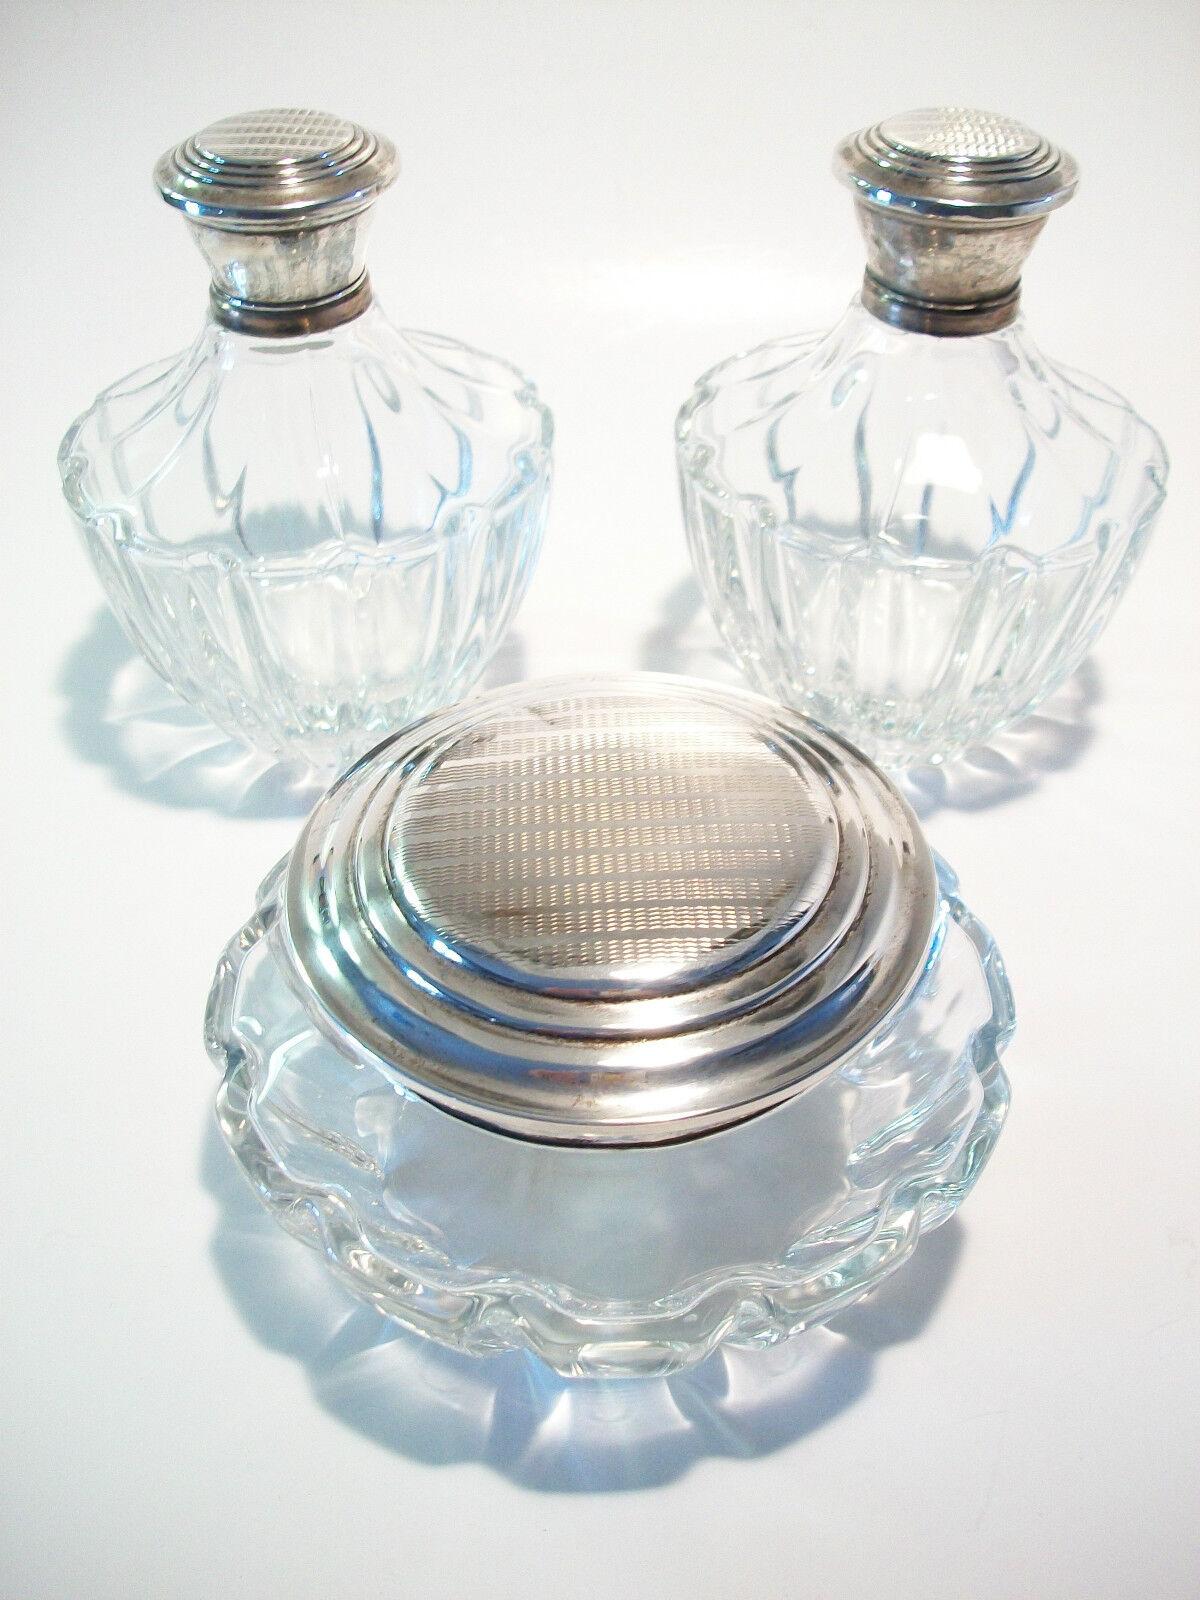 Vintage three piece crystal and silver plate vanity set - lidded powder bowl - two lidded bottles with stoppers for creams or lotions - machine tooled designs lids - each bottle with metal clad rim - unsigned - early 20th century.

Vintage Condition